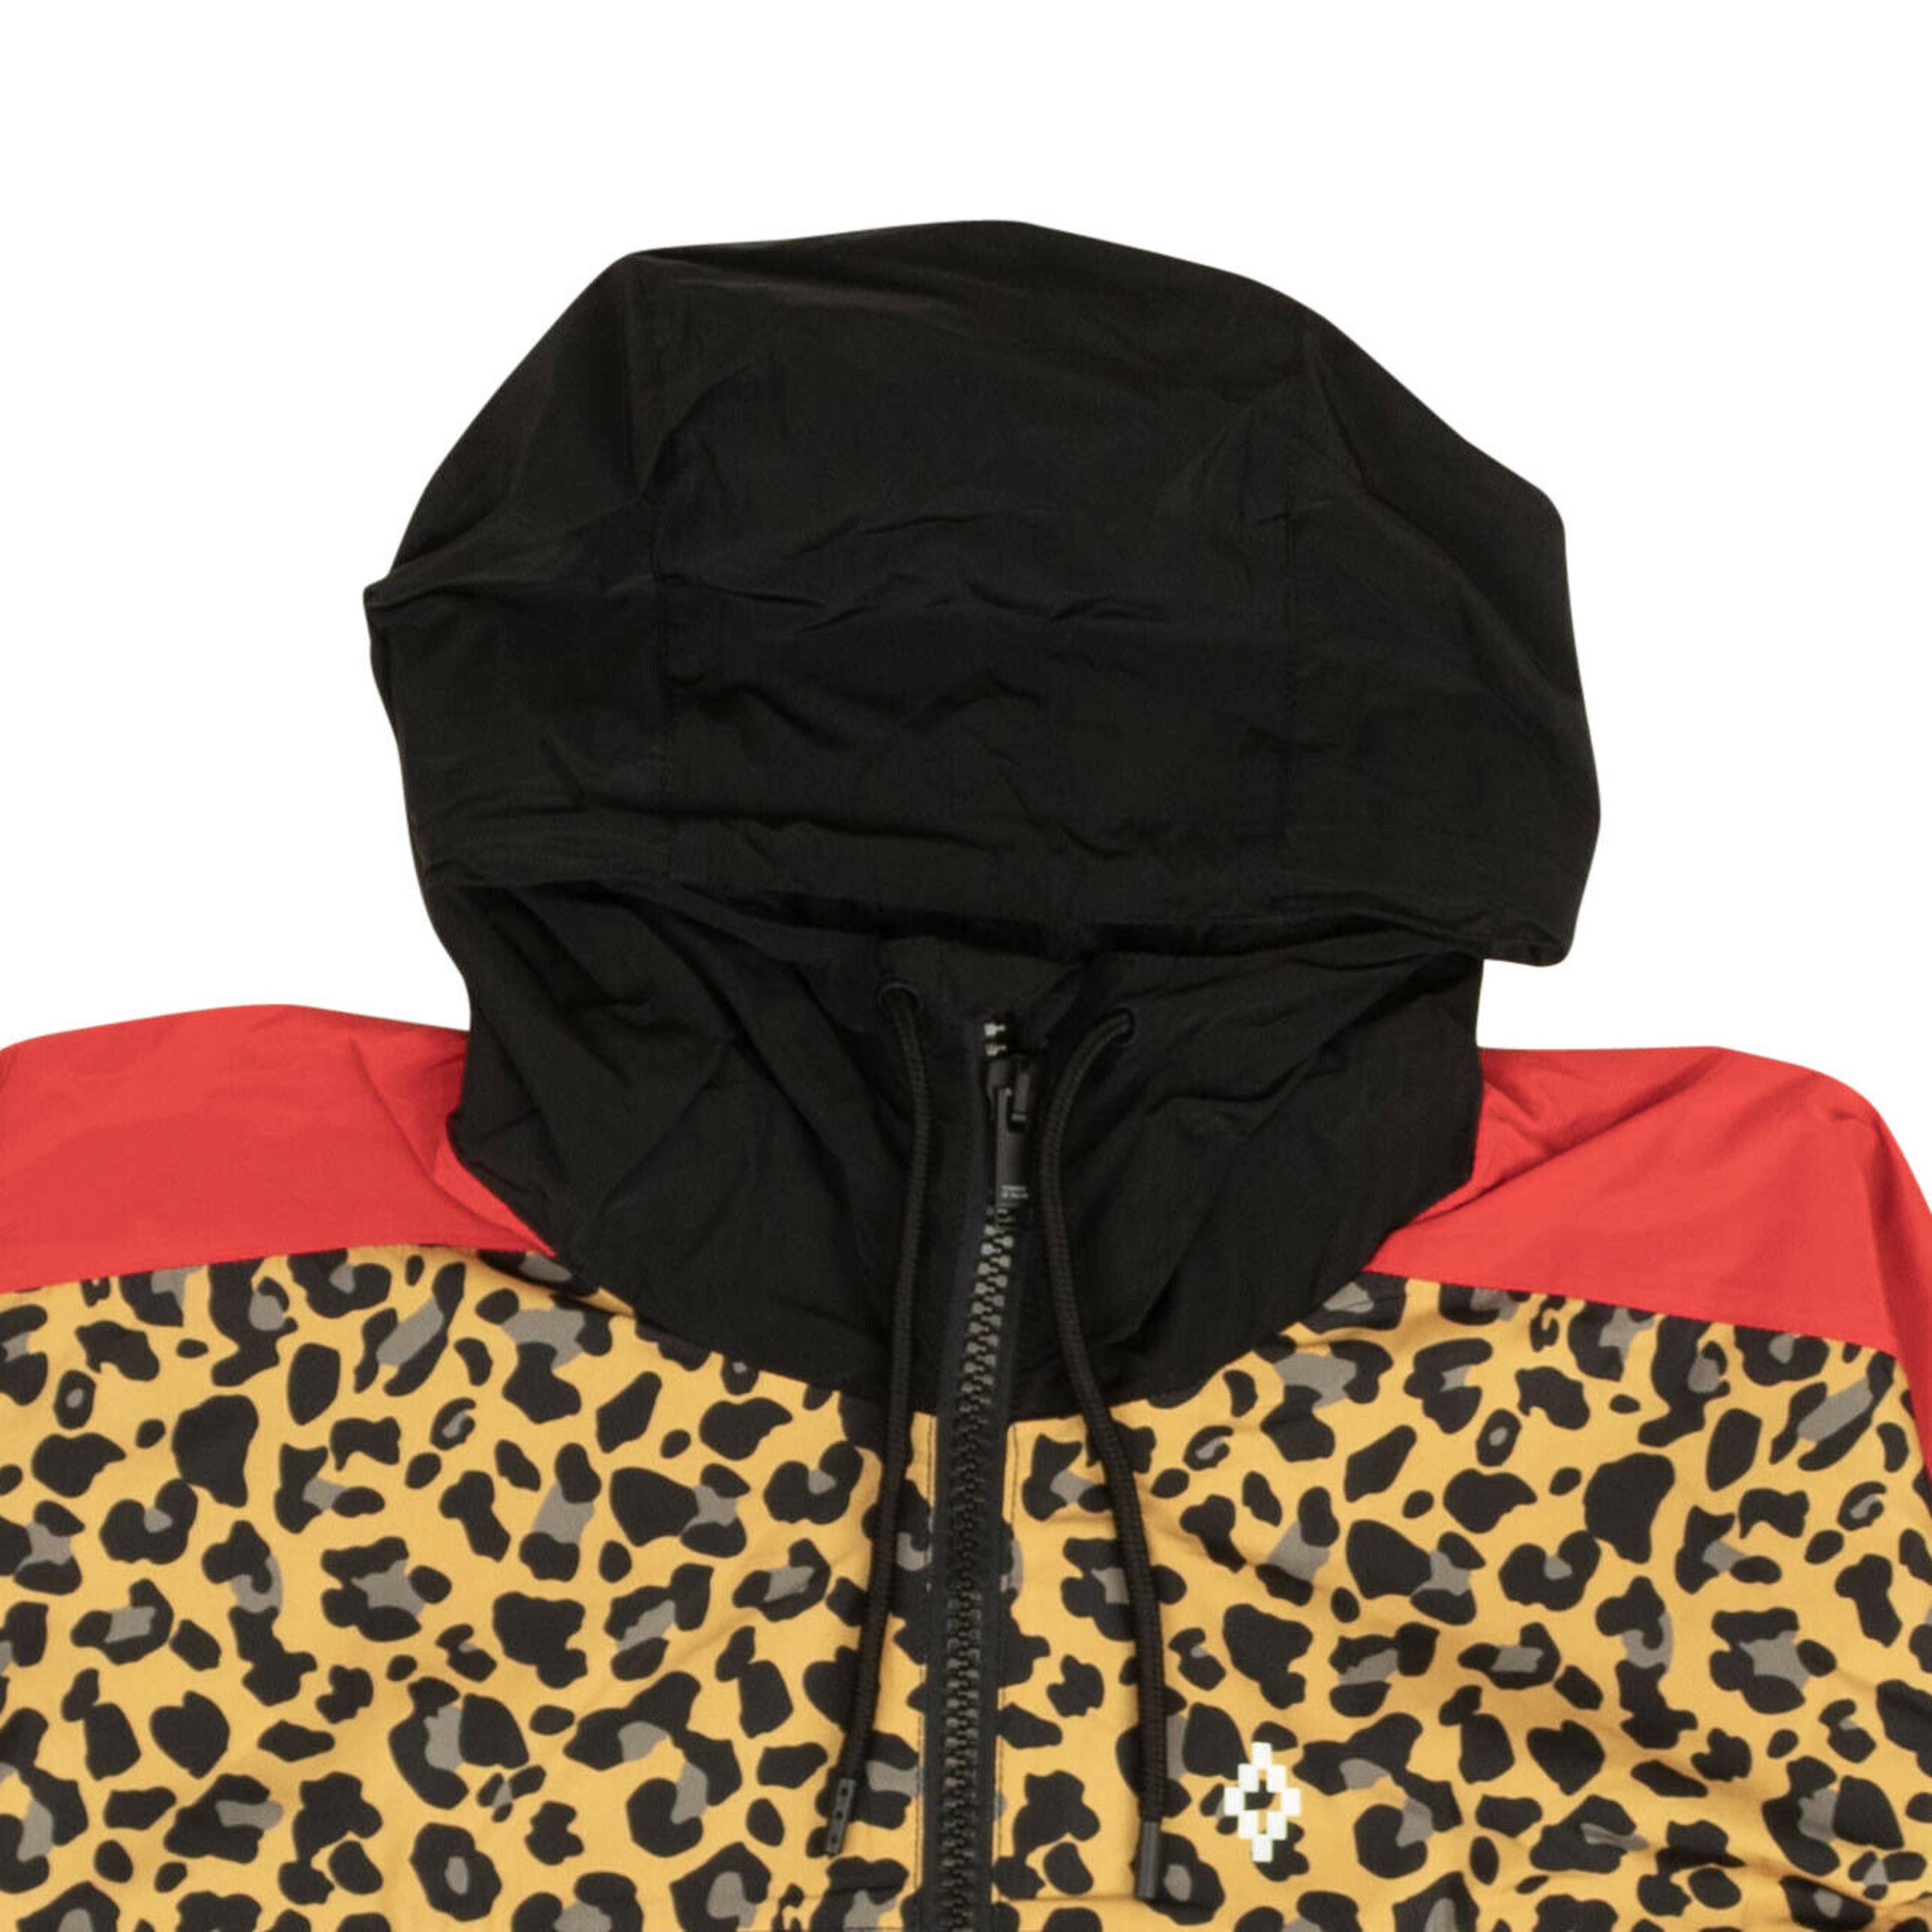 Alternate View 2 of Black And Red Leopard Windbreaker